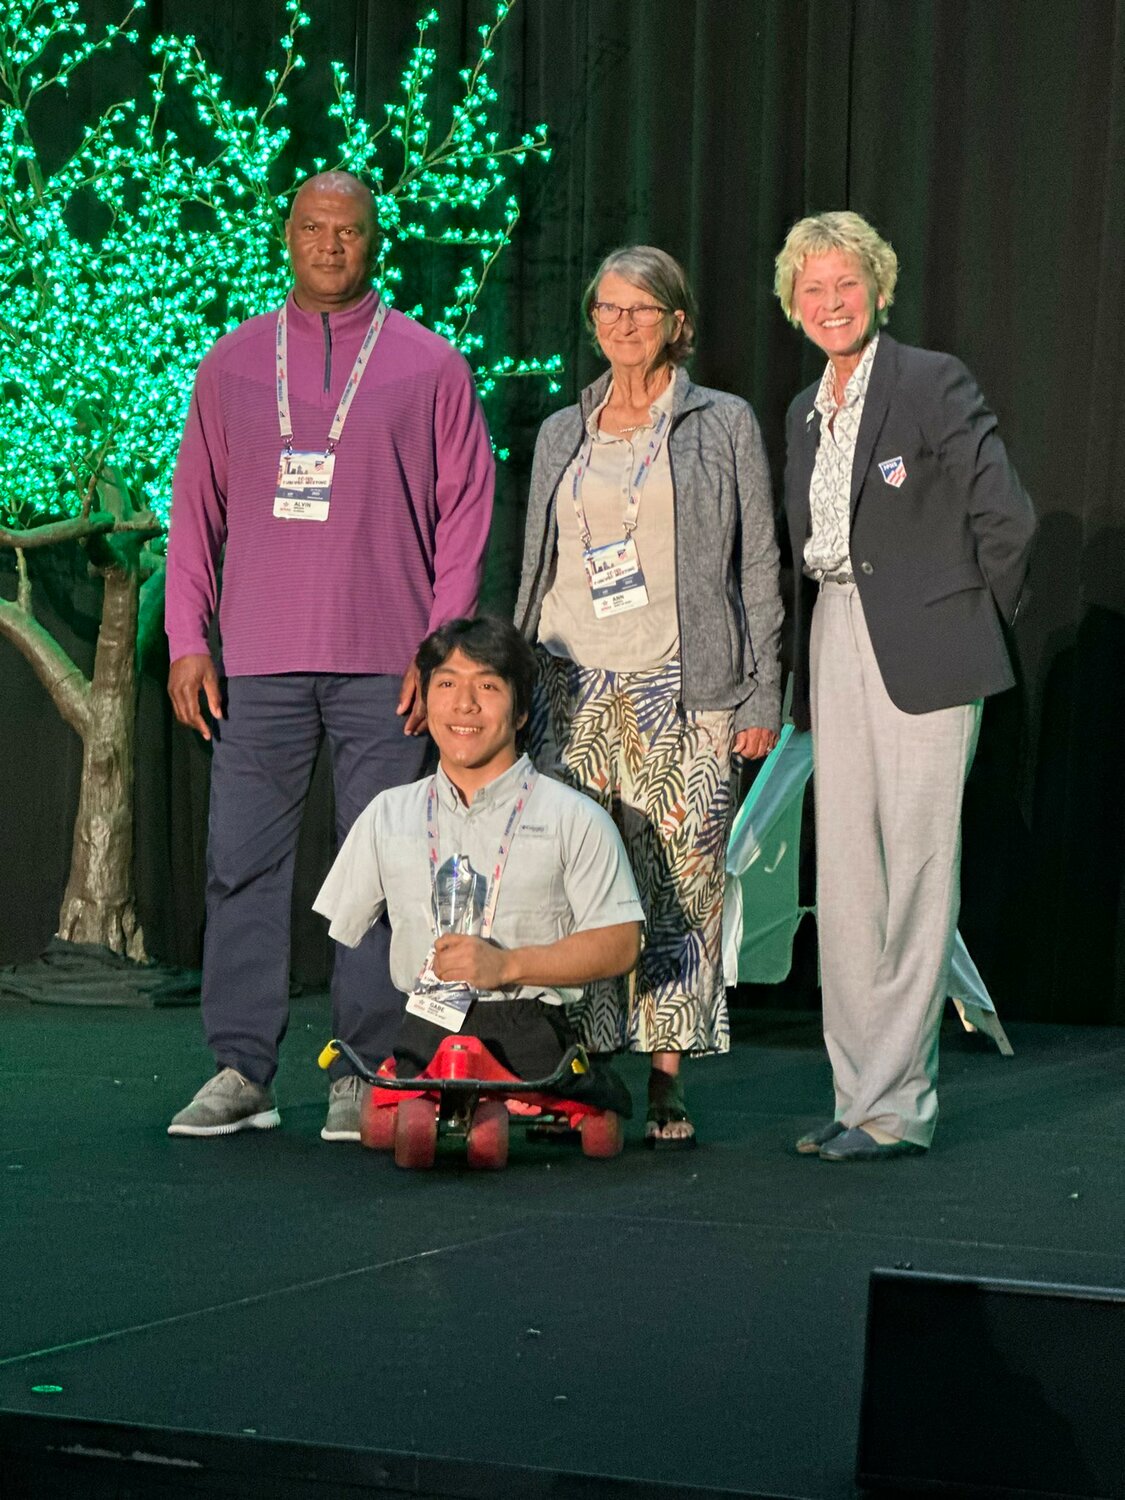 Guntersville’s Gabe Marsh (center) was presented the National Spirit of Sport Award on Wednesday, June 28, at the 104th NFHS Summer Meeting in Seattle. Pictured with him, from left, are AHSAA Executive Director Alvin Briggs, his mother Ann Marsh and NFHS Executive Director Karissa Niehoff.